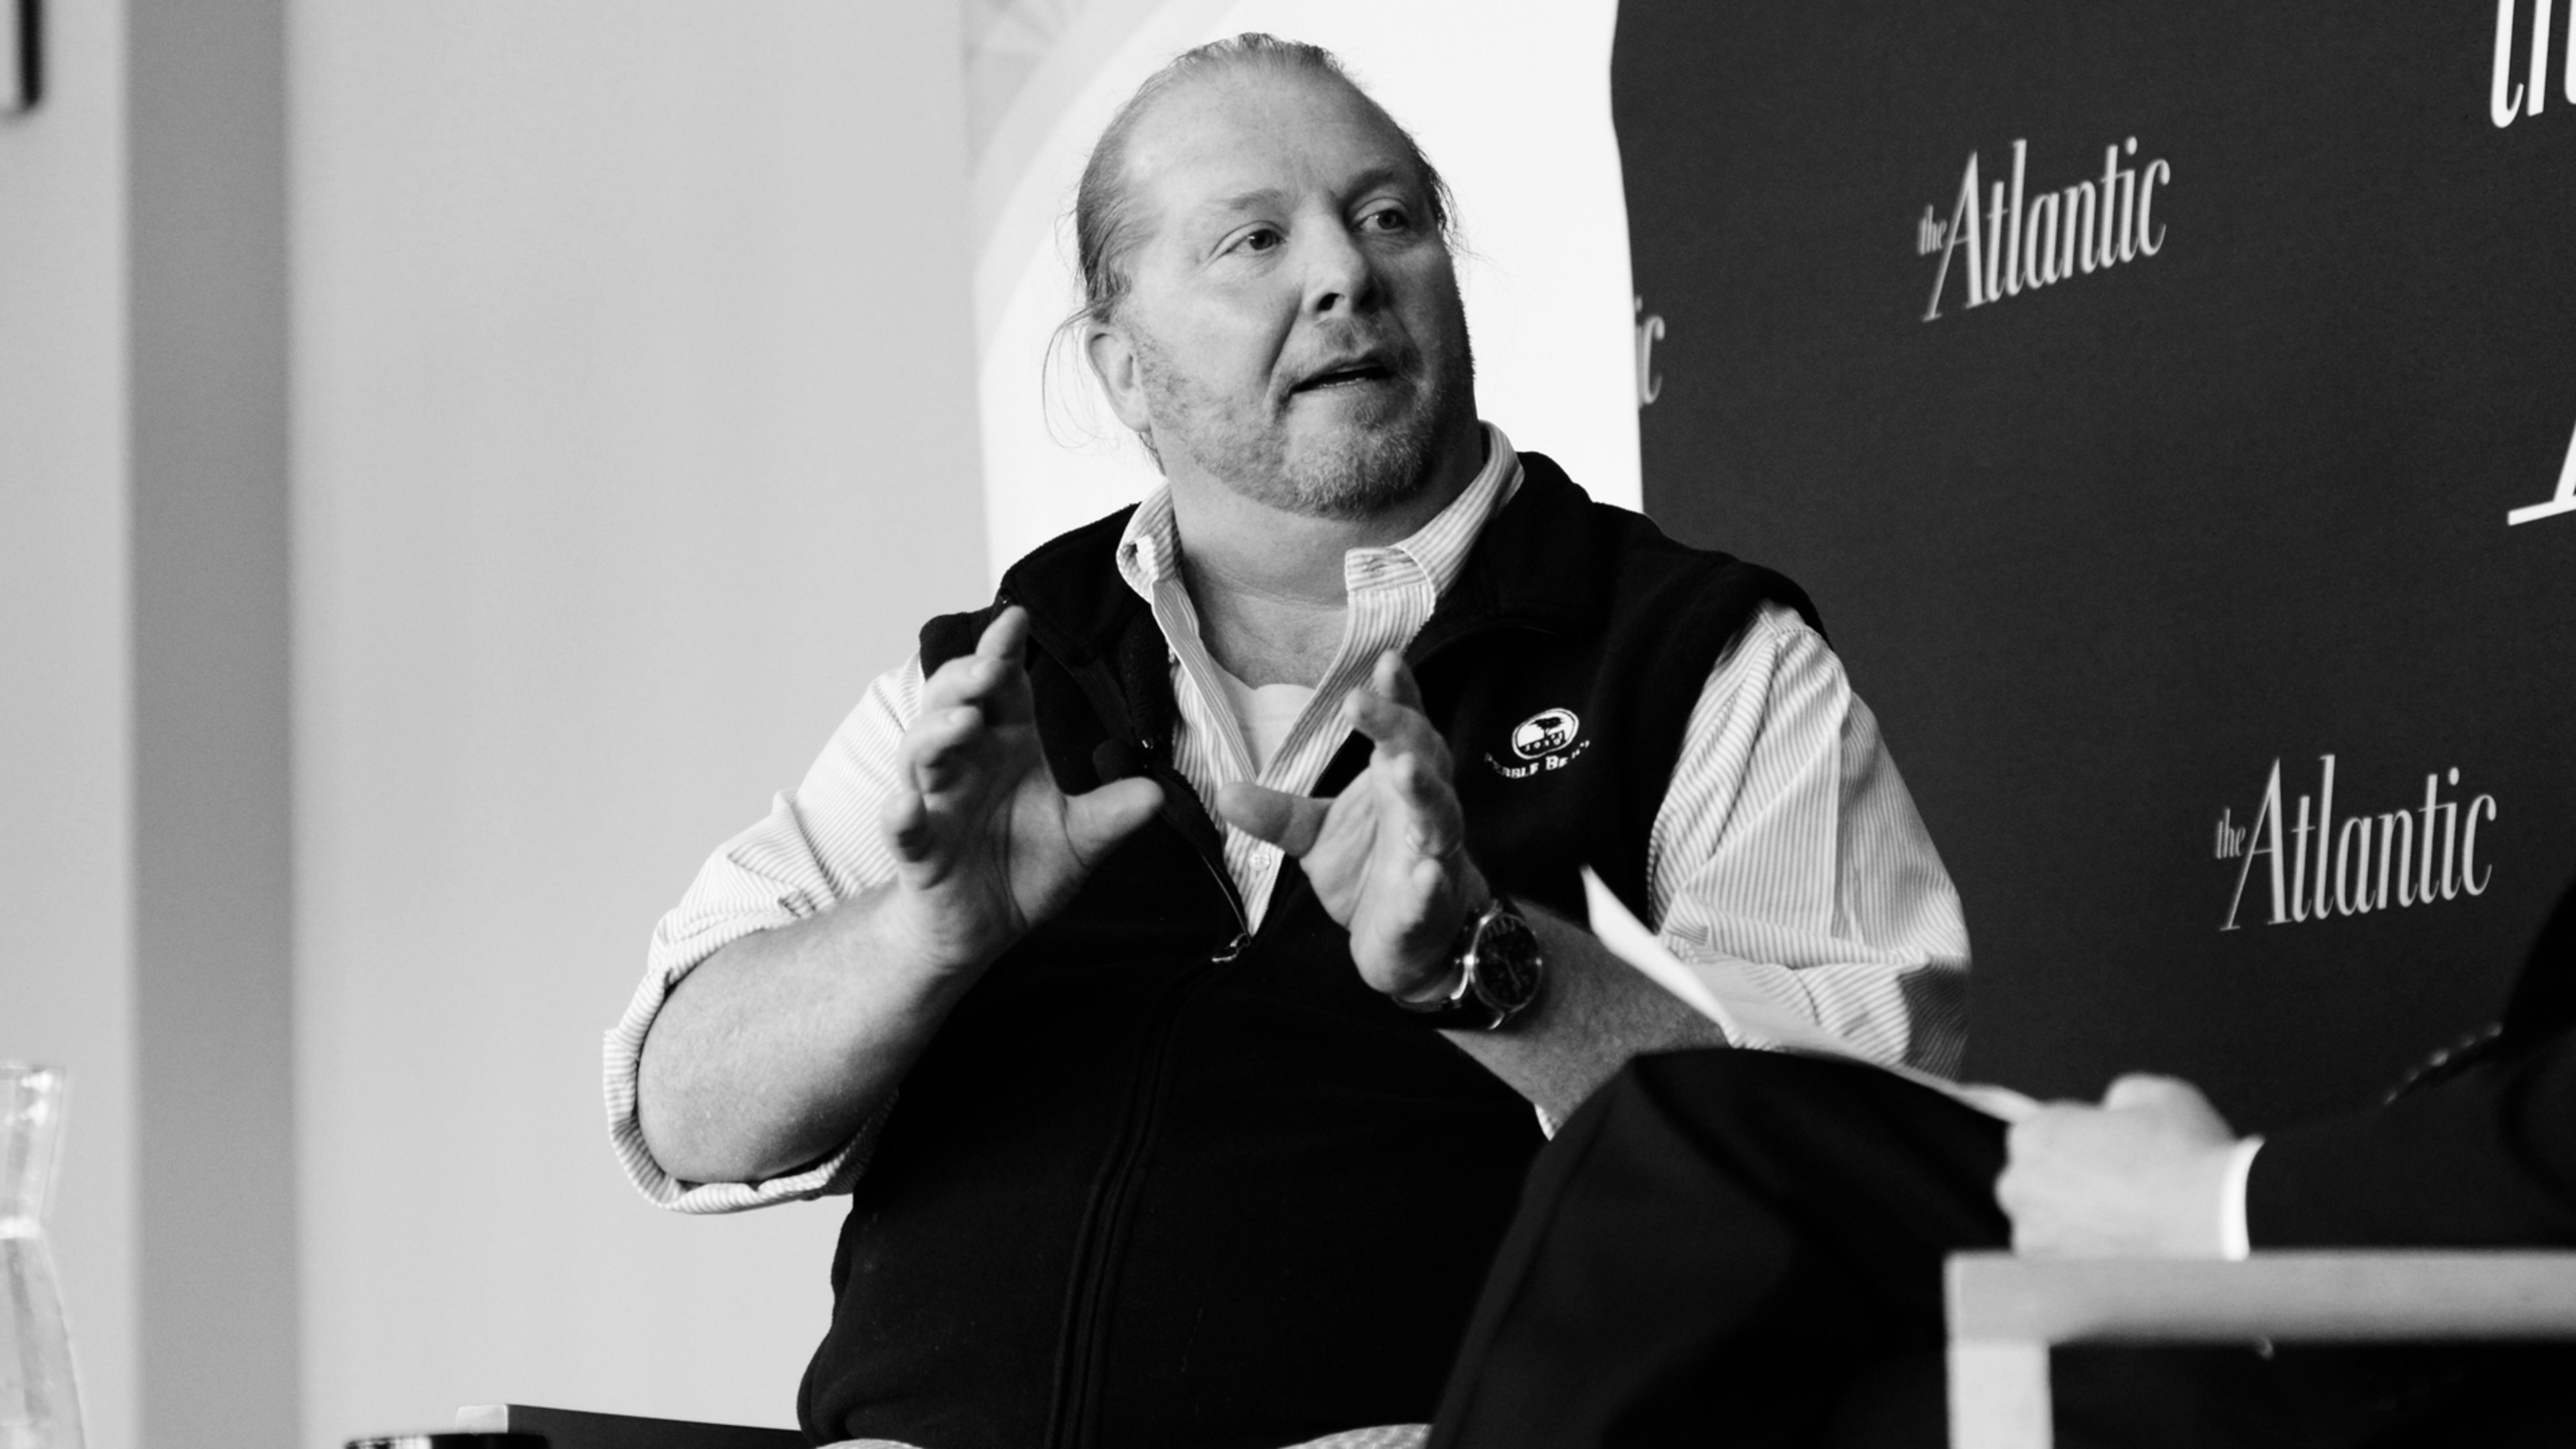 It took a full year, but Mario Batali is finally leaving his restaurants and Eataly